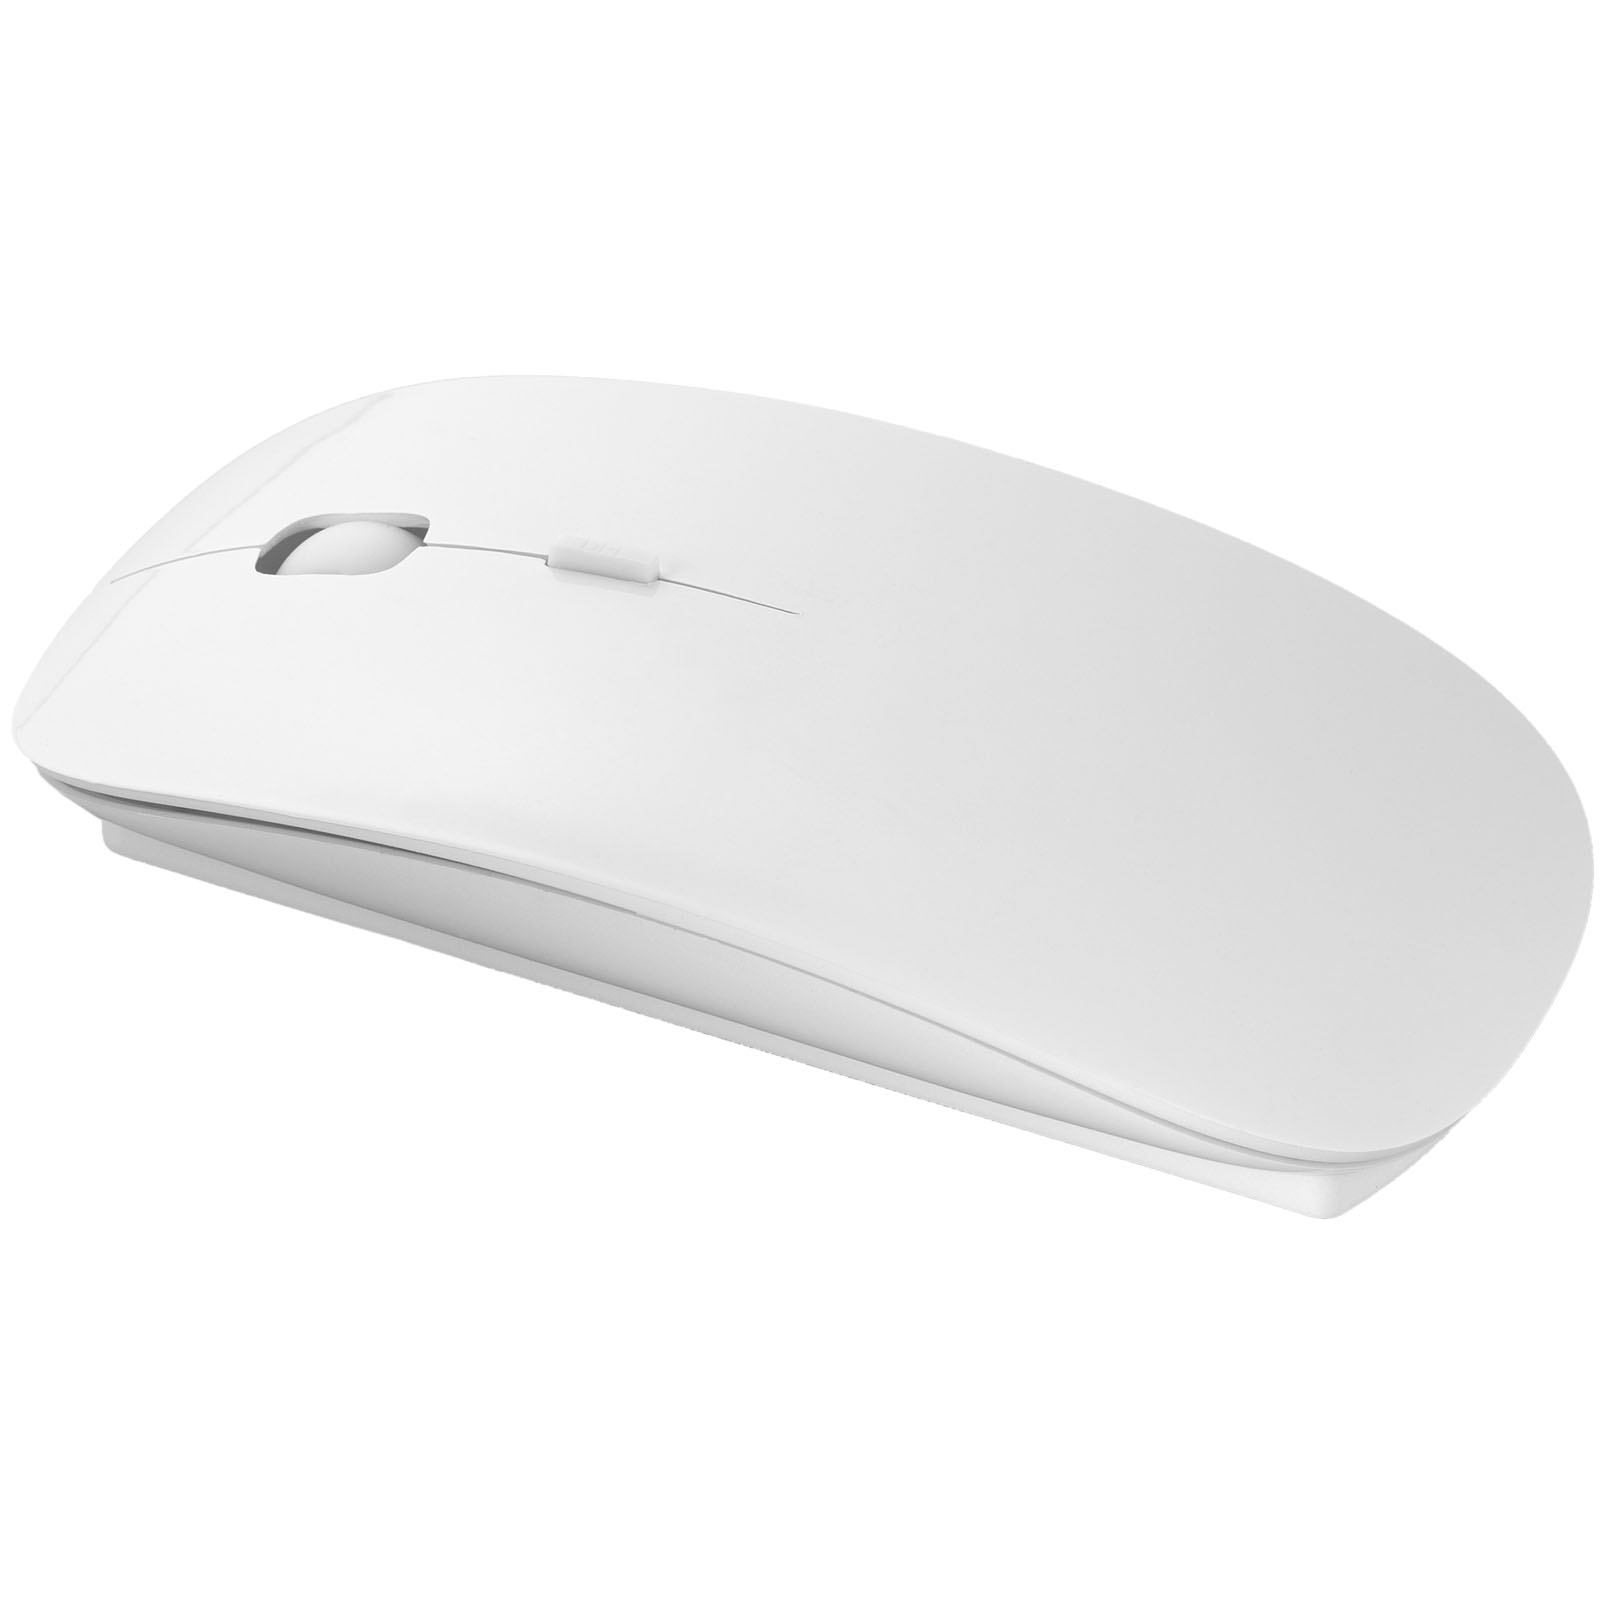 Wireless Optical Mouse with Adjustable DPI - Saint Helens